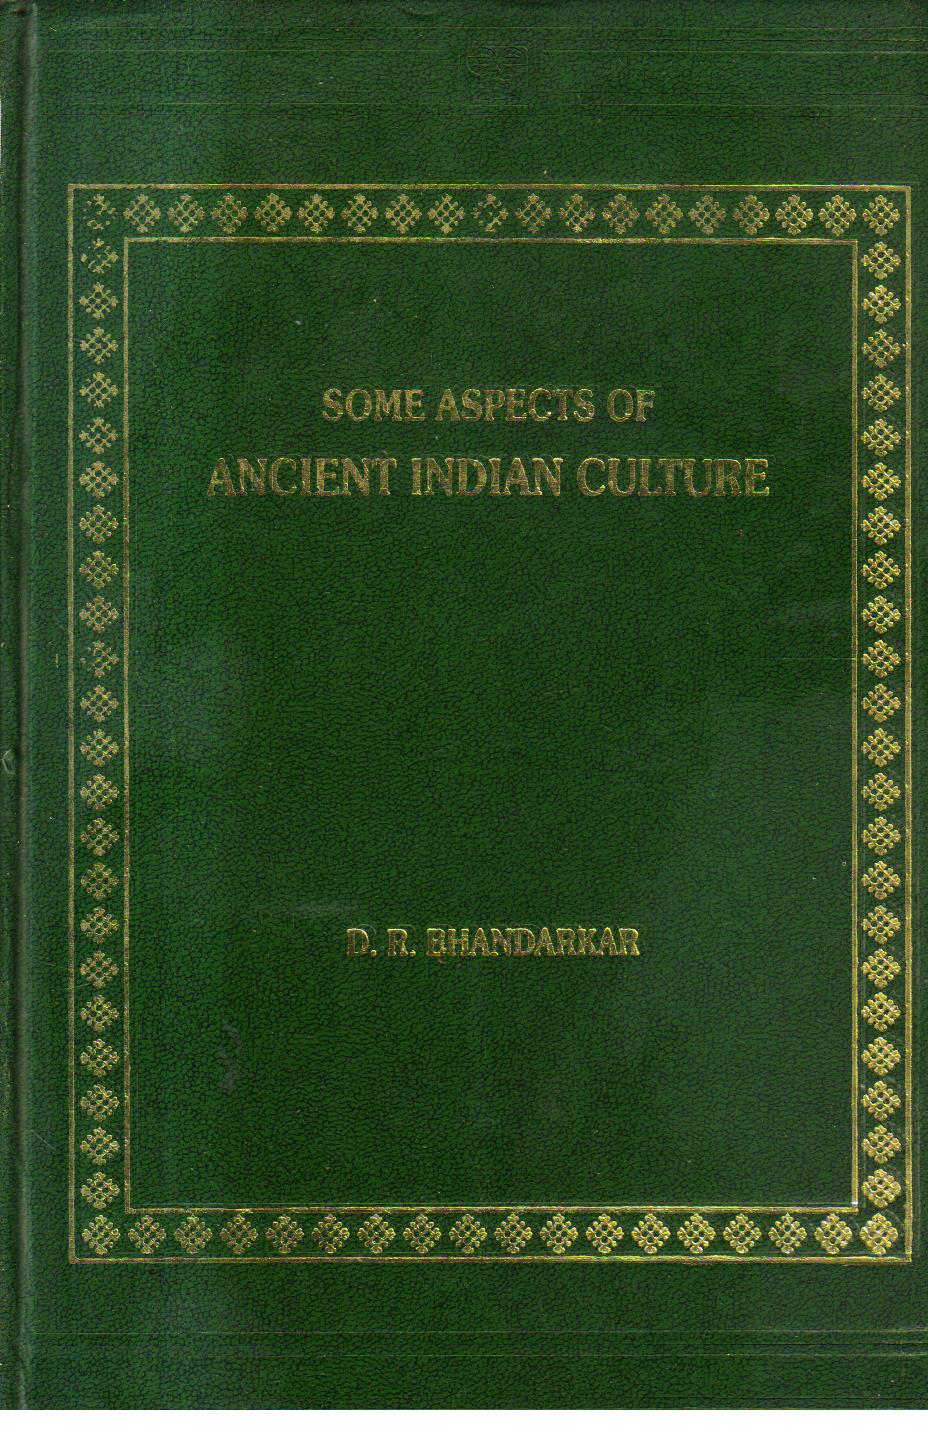 Some Aspects of Ancient Indian Culture.